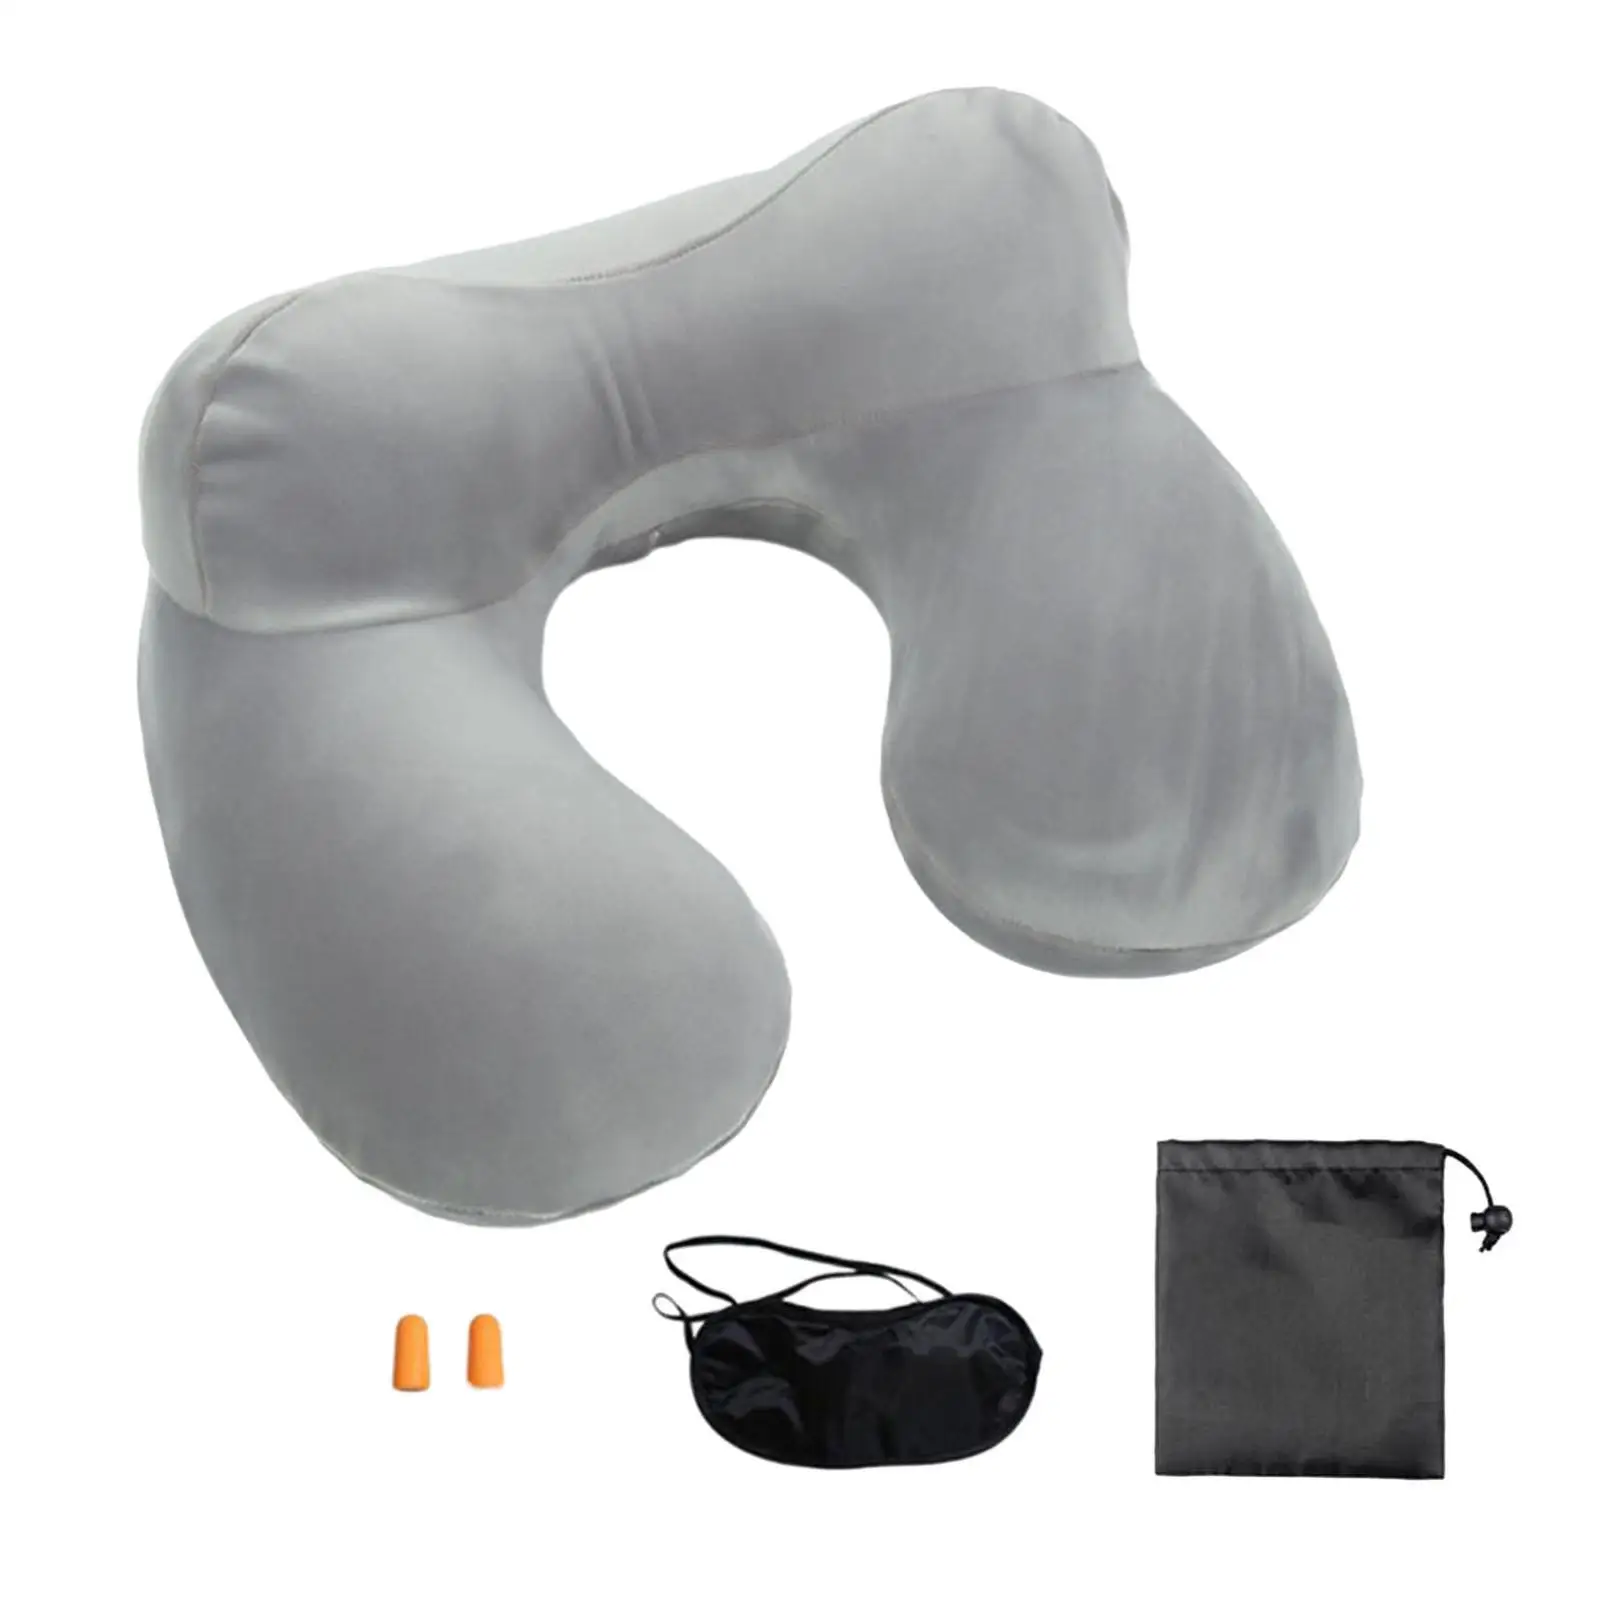 Travel Pillow Comfortable Soft U Shape Neck Pillow Inflatable Air Pillow for Home Office Hiking Outdoor Sports Camping Airplane